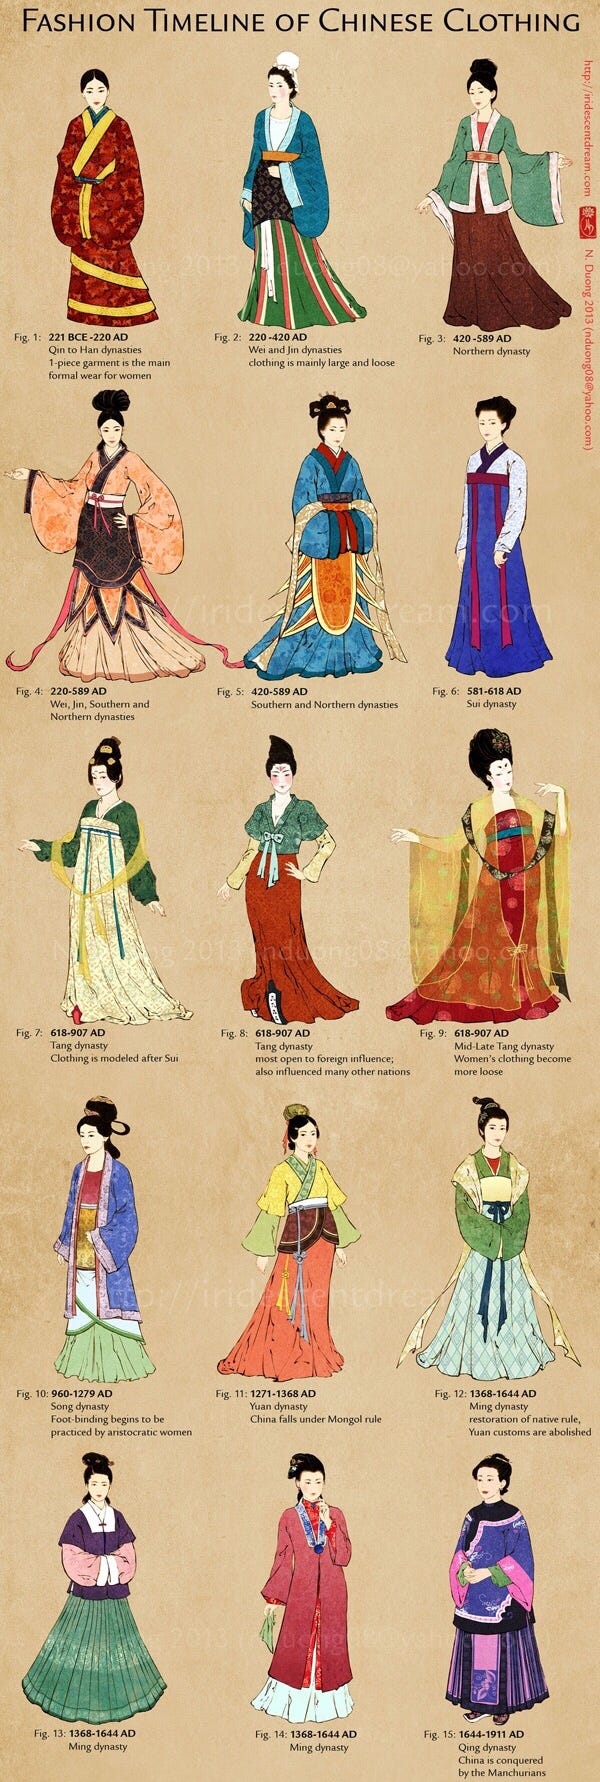 The Traditional Chinese Clothing-”Hanfu” | by Chenhui He | Winter ...